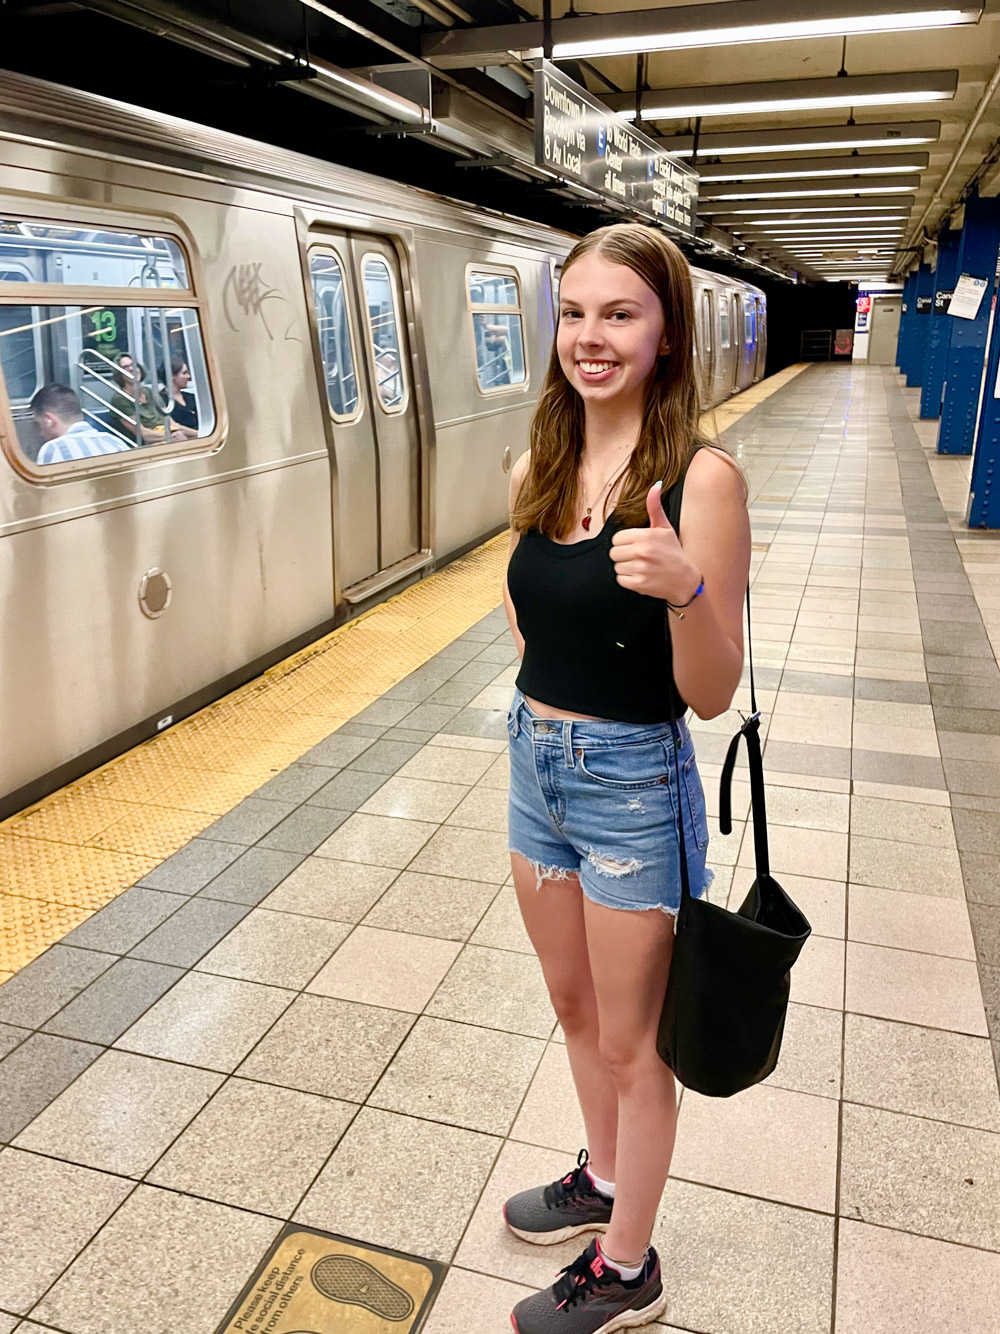 Riding the subway in NYC for the first time